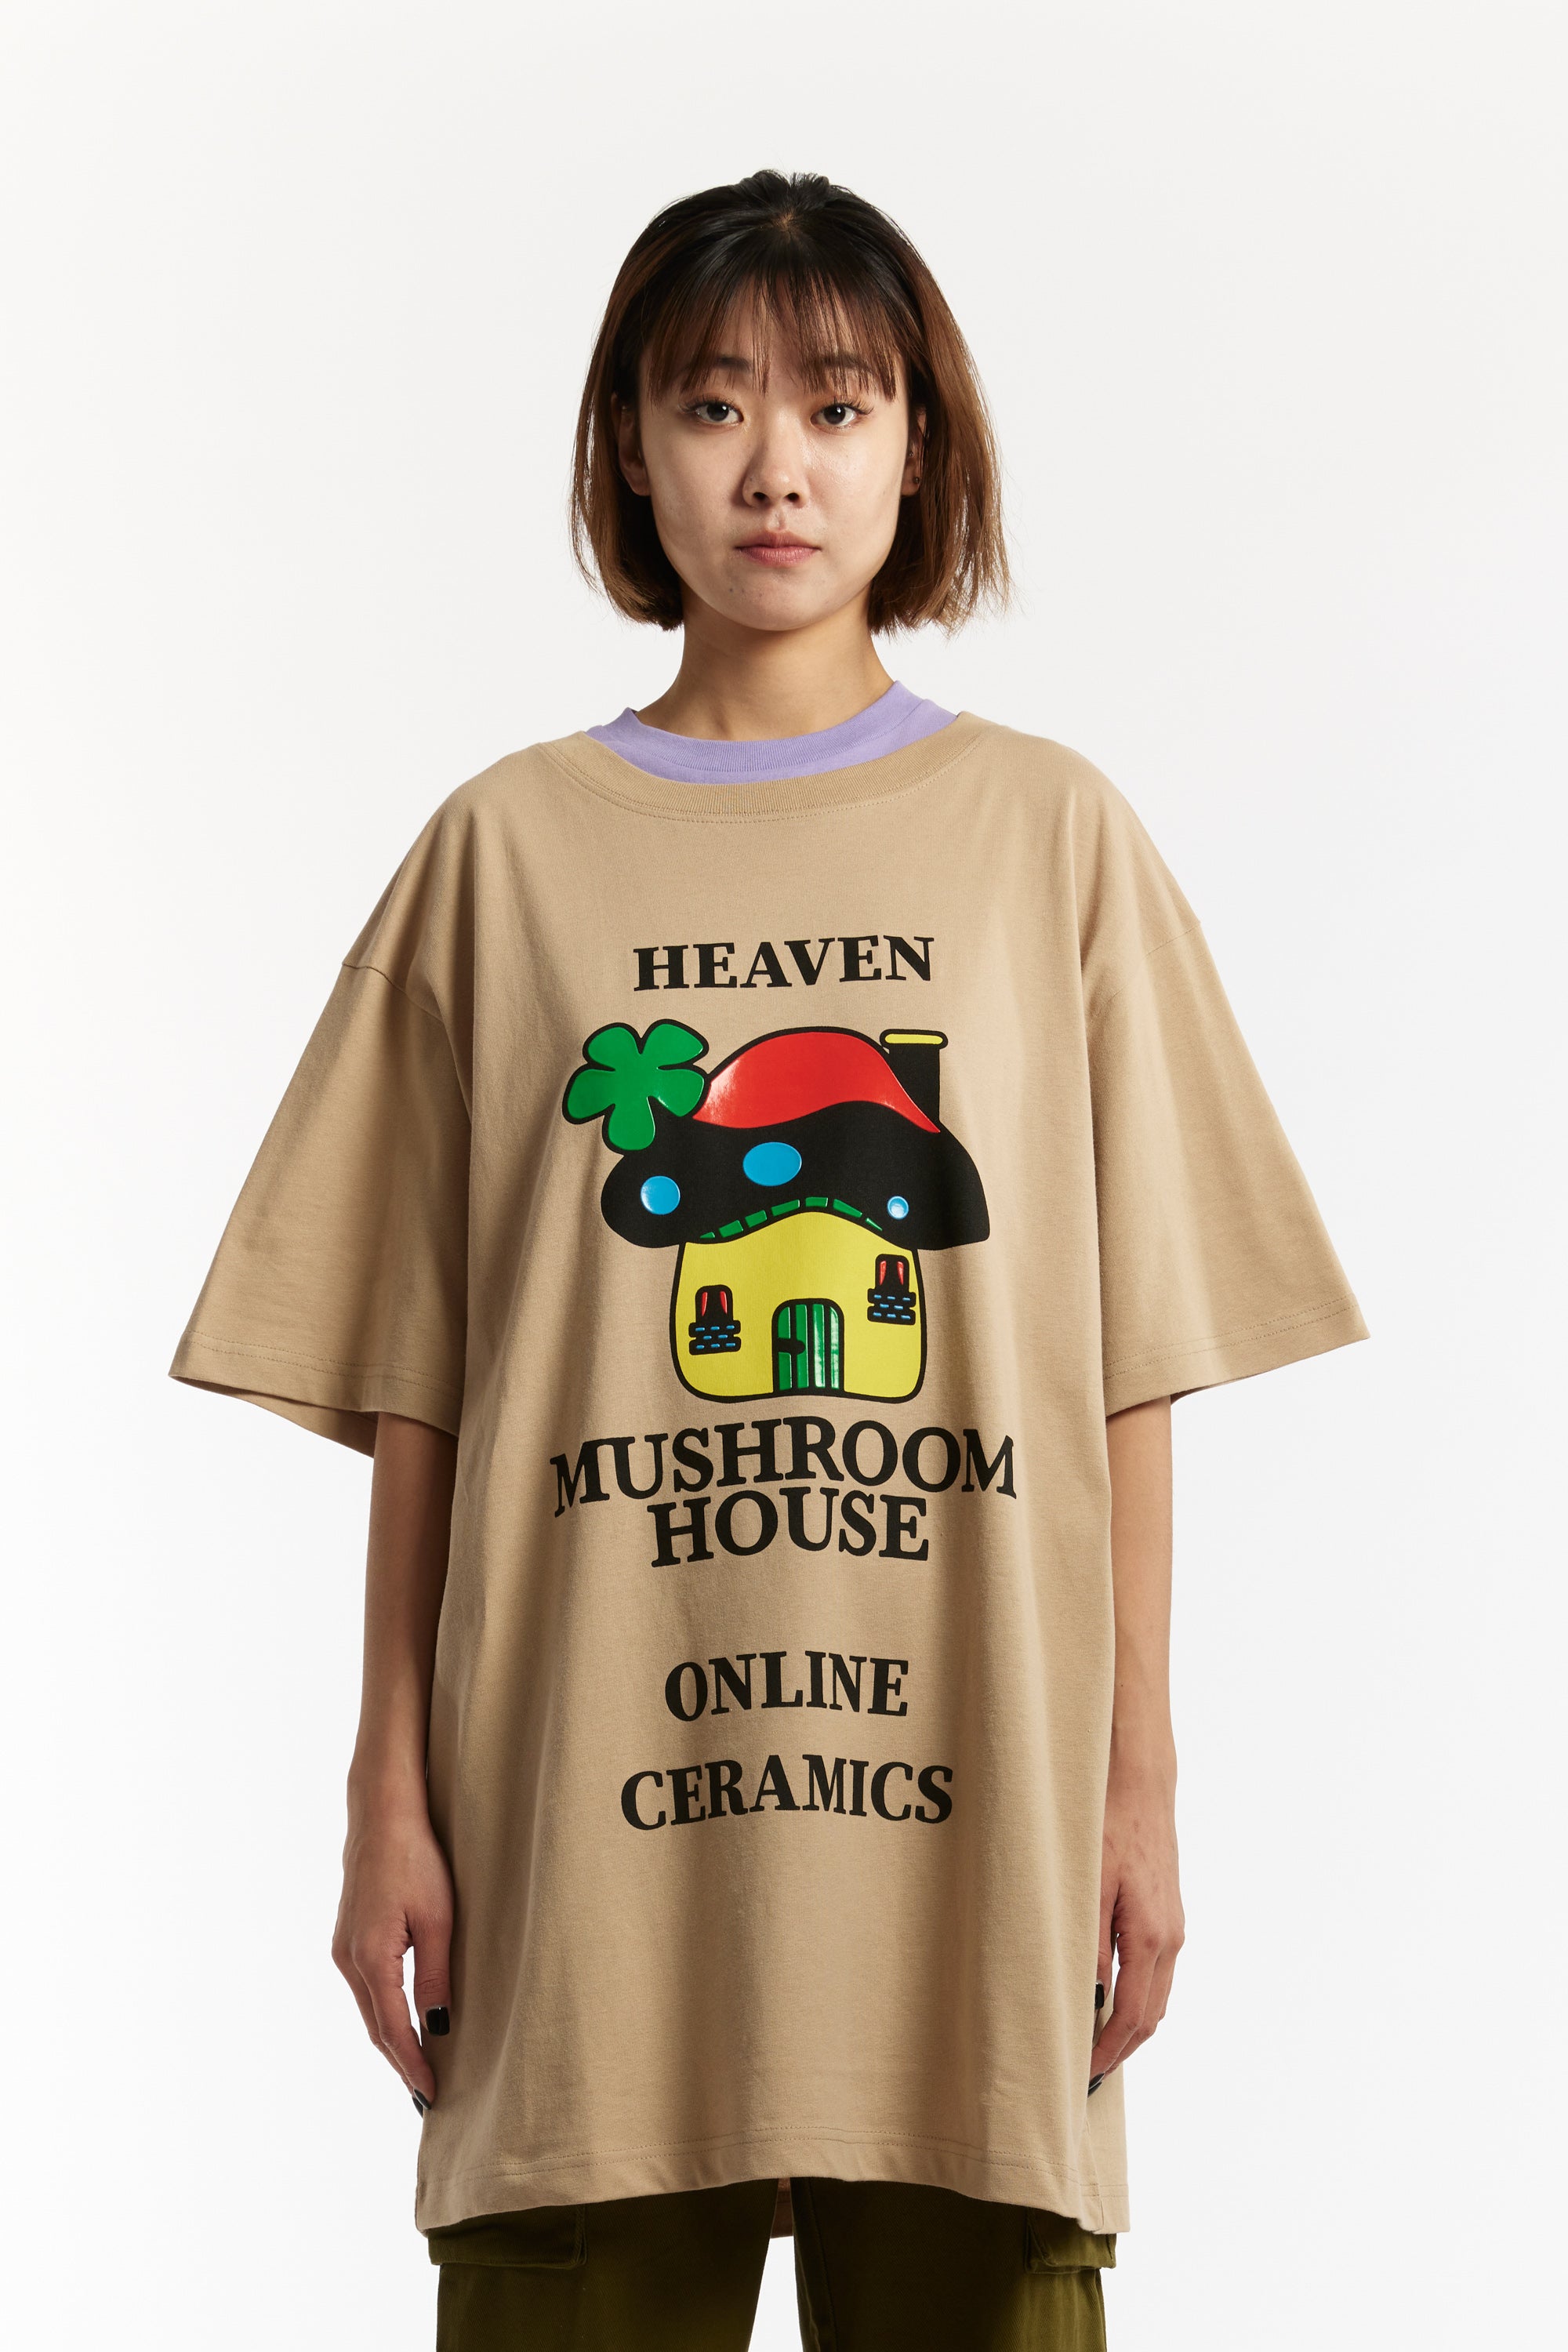 The HEAVEN - ONLINE CERAMICS JUMBO TEE  available online with global shipping, and in PAM Stores Melbourne and Sydney.